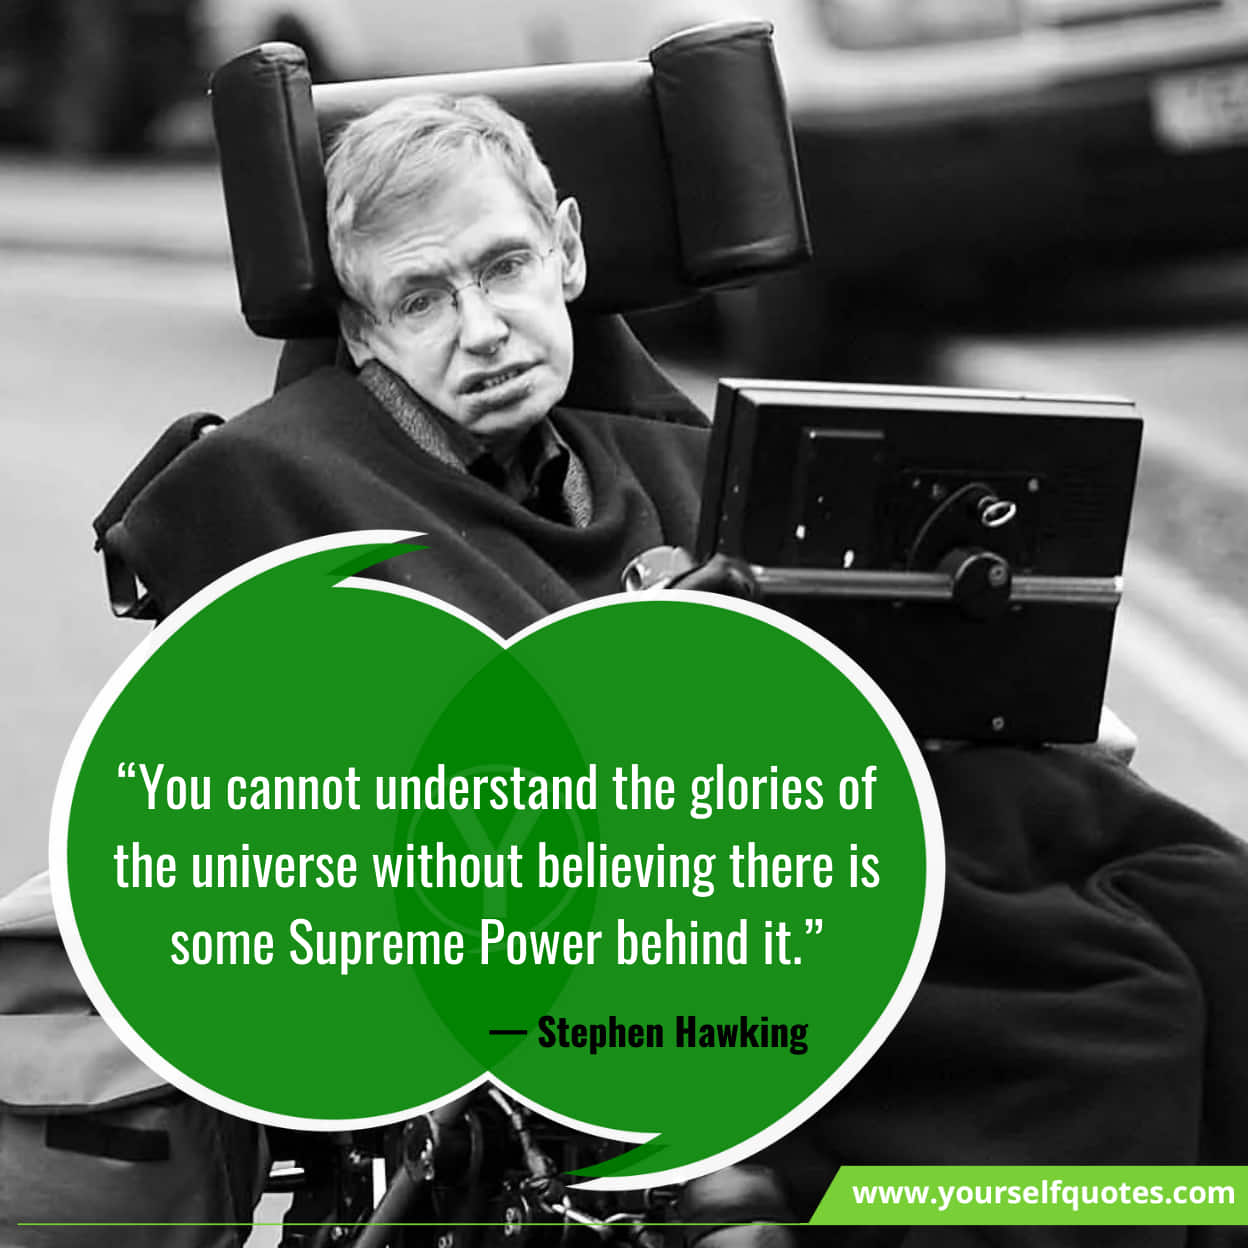 Stephen Hawking Quotes About The Universe, Humanity, Love